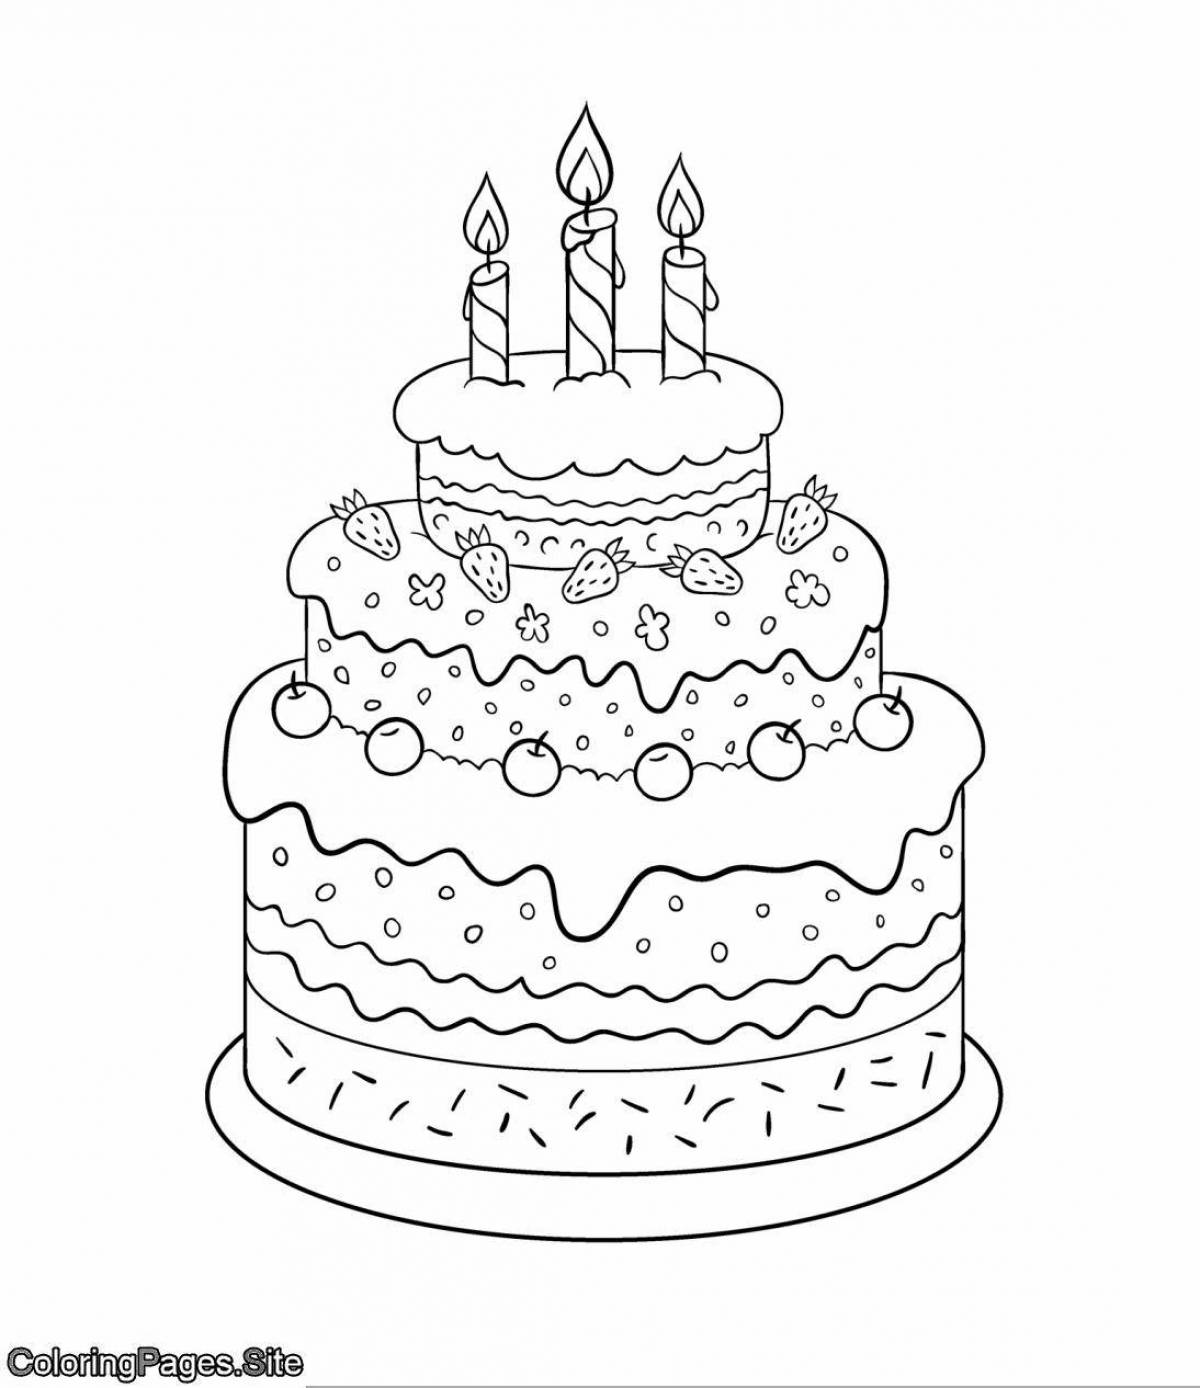 Large cake coloring page